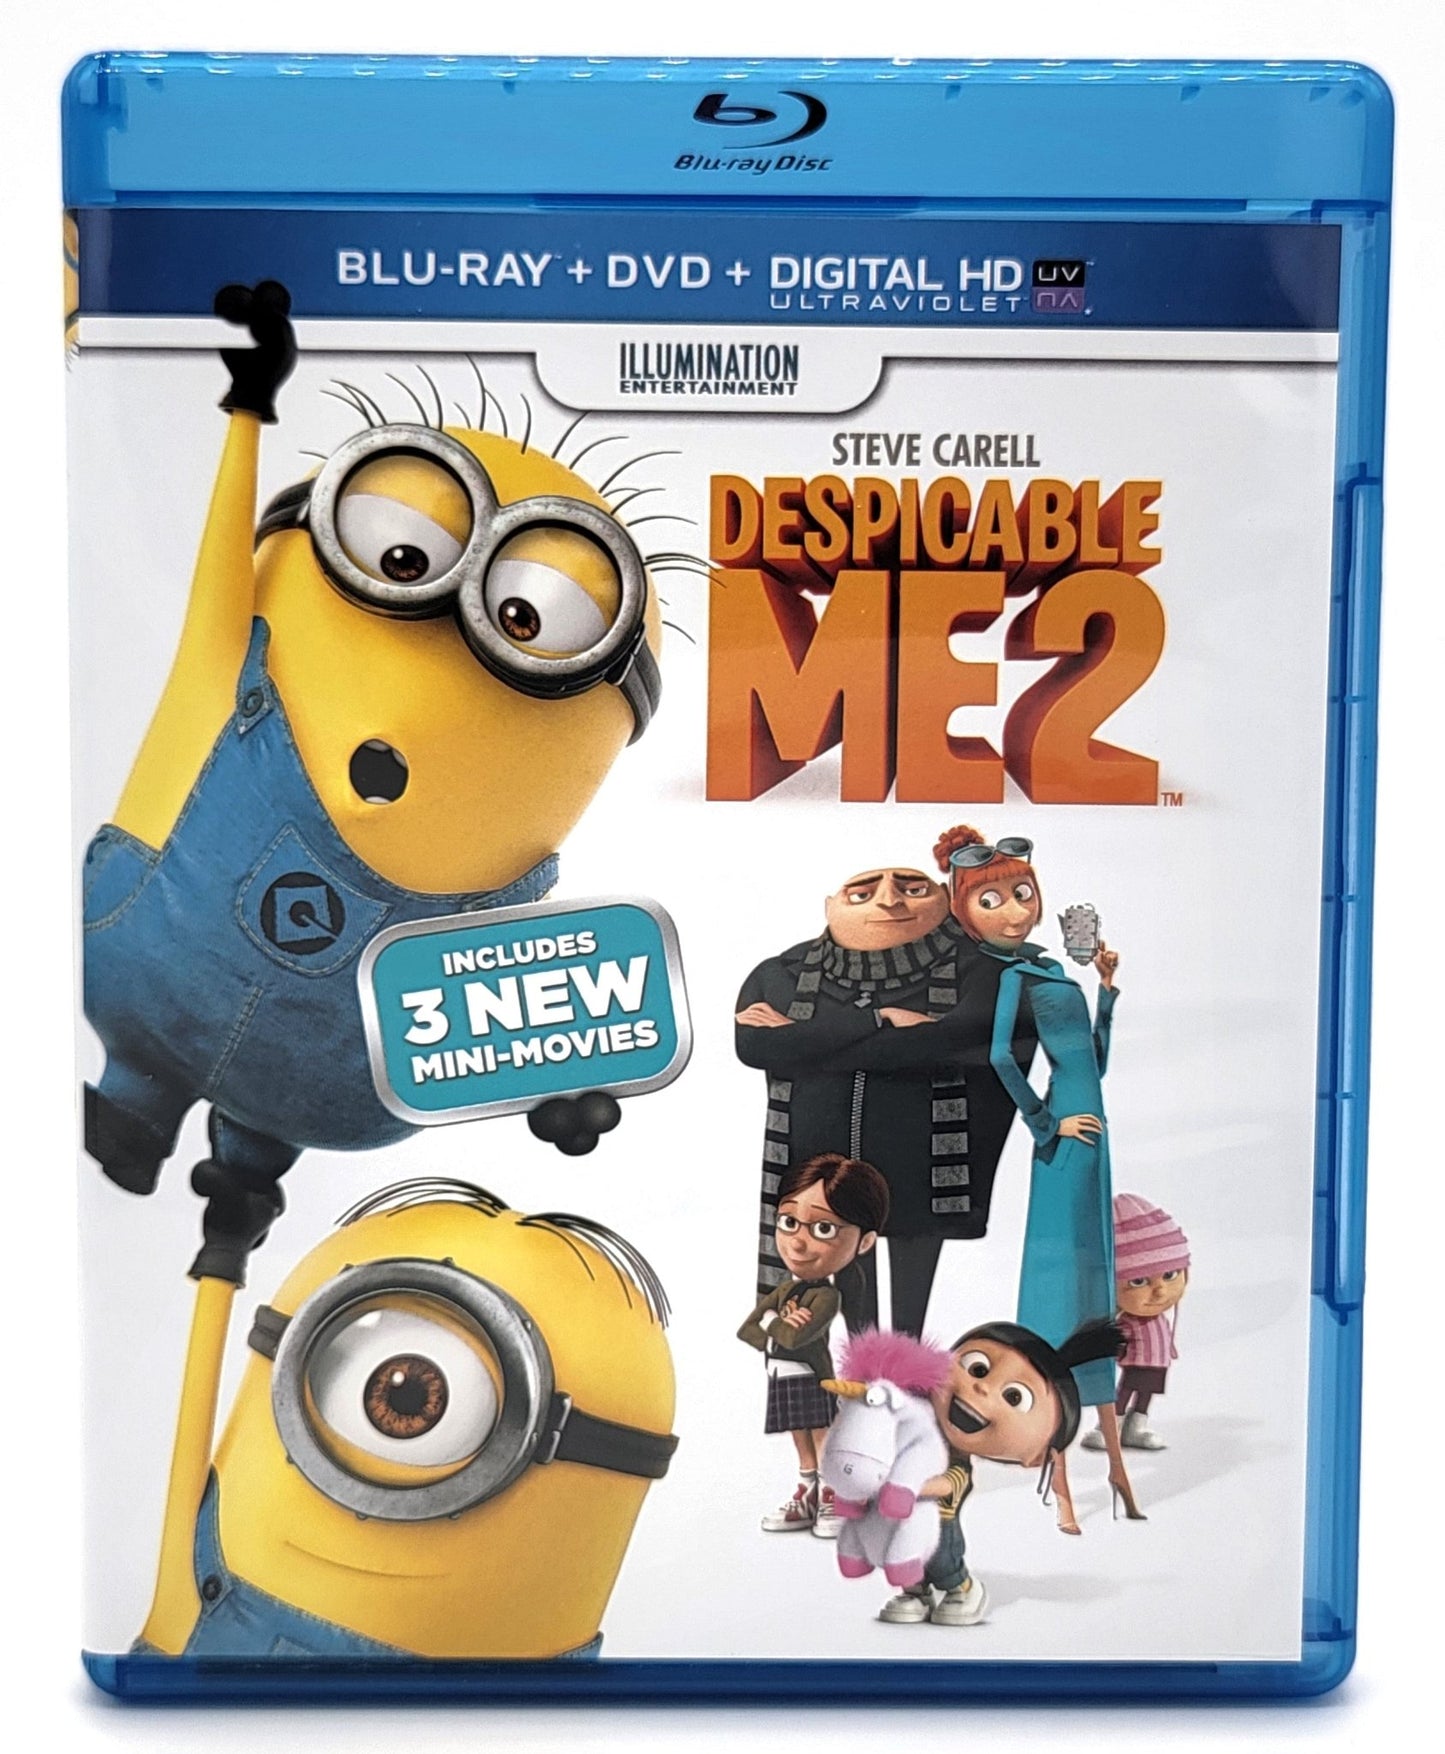 Illumination Entertainment, - Despicable ME 2 | Blu-ray & DVD | Includes 3 New Mini Movies - DVD & Blu-ray - Steady Bunny Shop